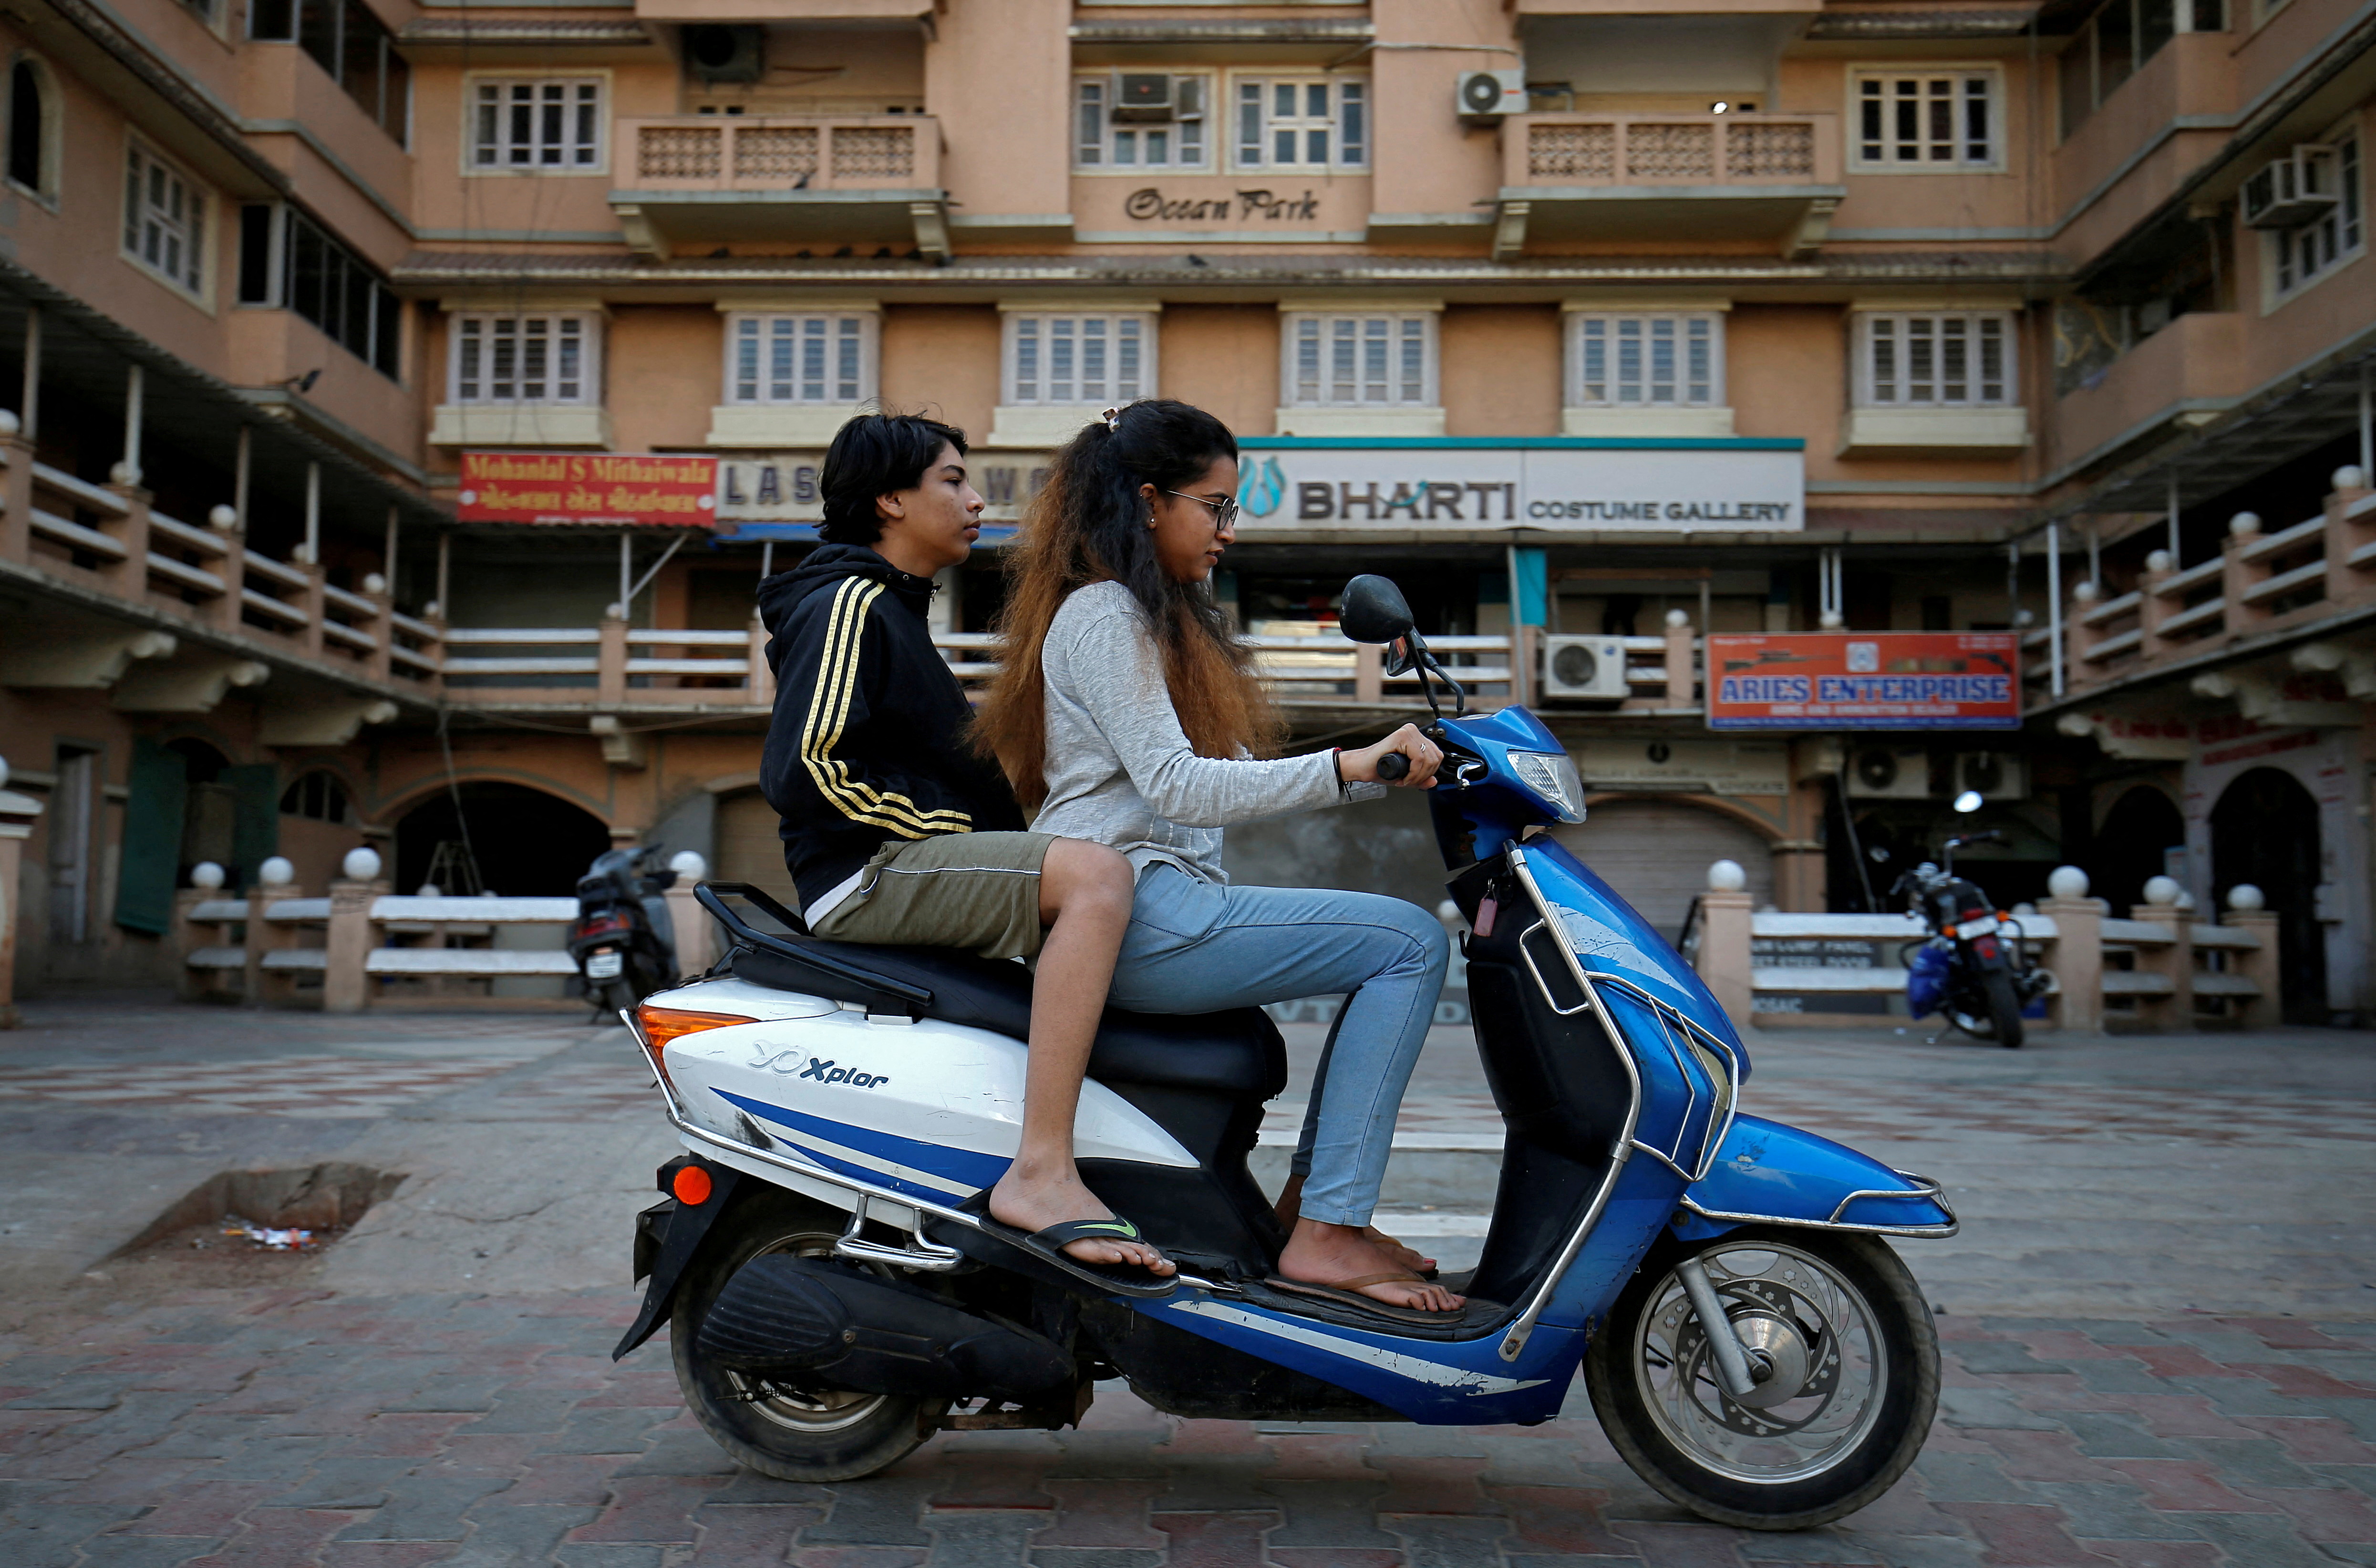 Girls ride an electric scooter in Ahmedabad, India, December 30, 2018. REUTERS/Amit Dave